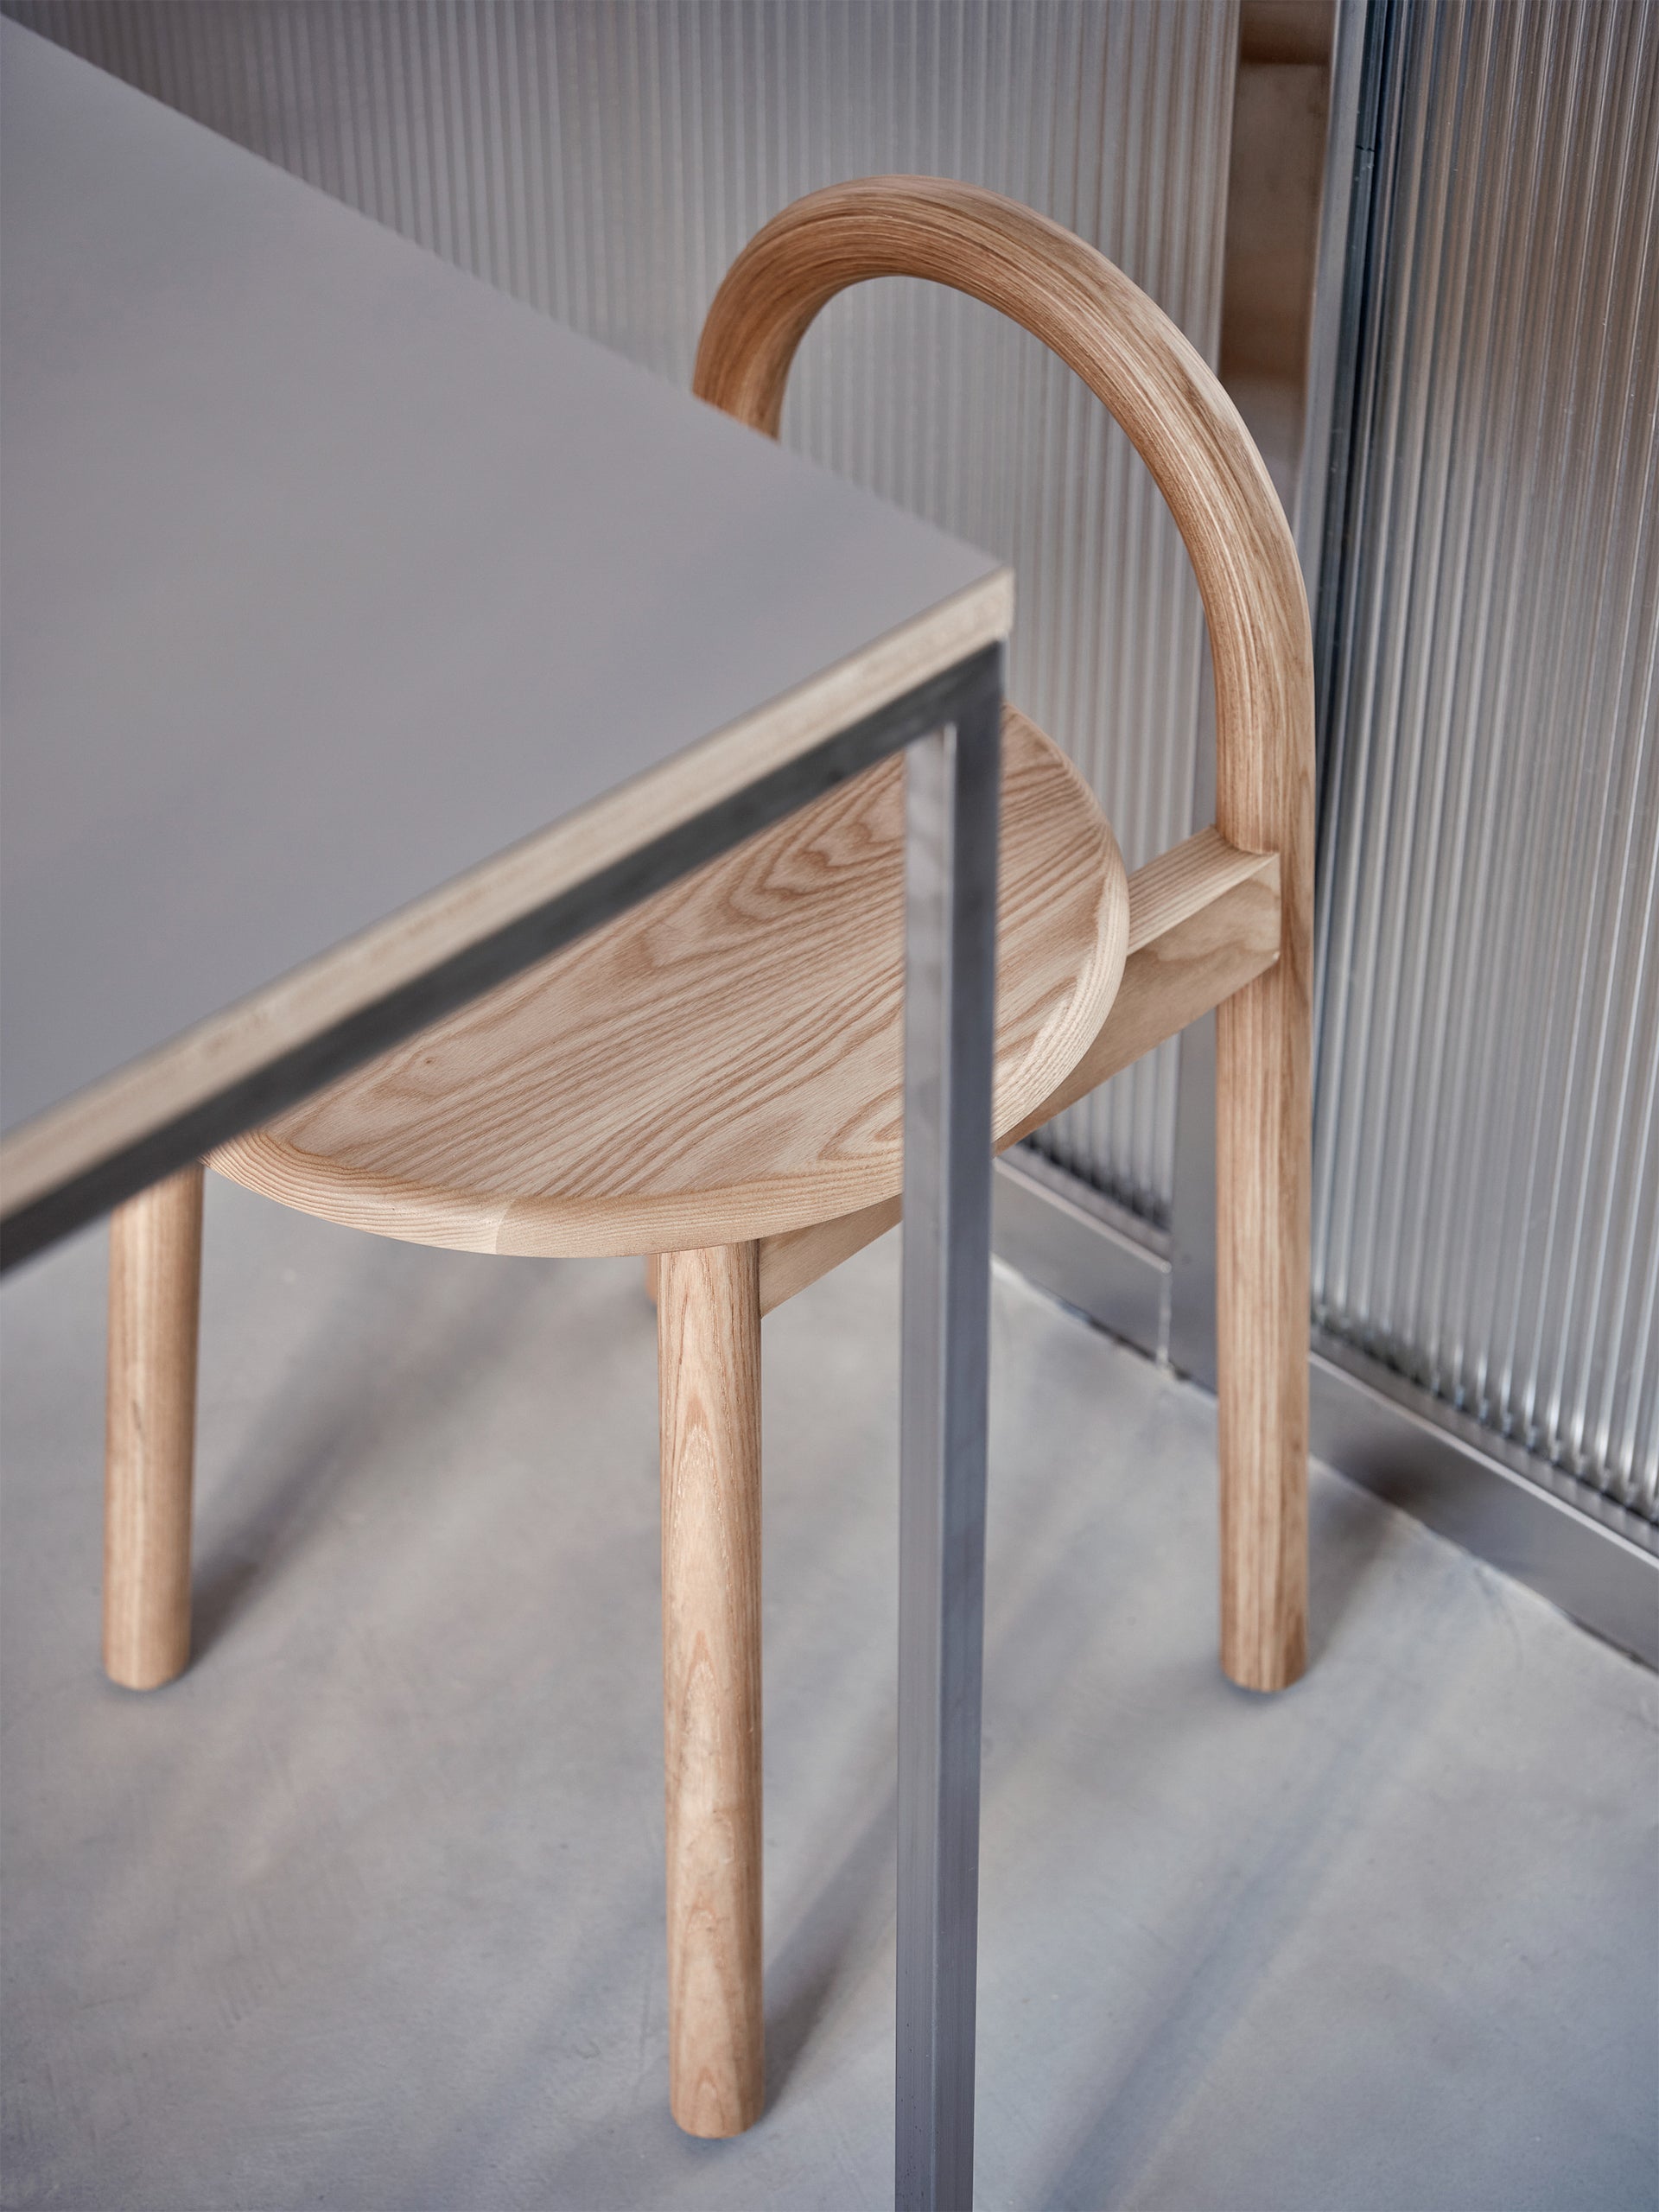 Bobby Timber Stool and Bobby Chair | Ode Eatery by fortytwelve | DesignByThem